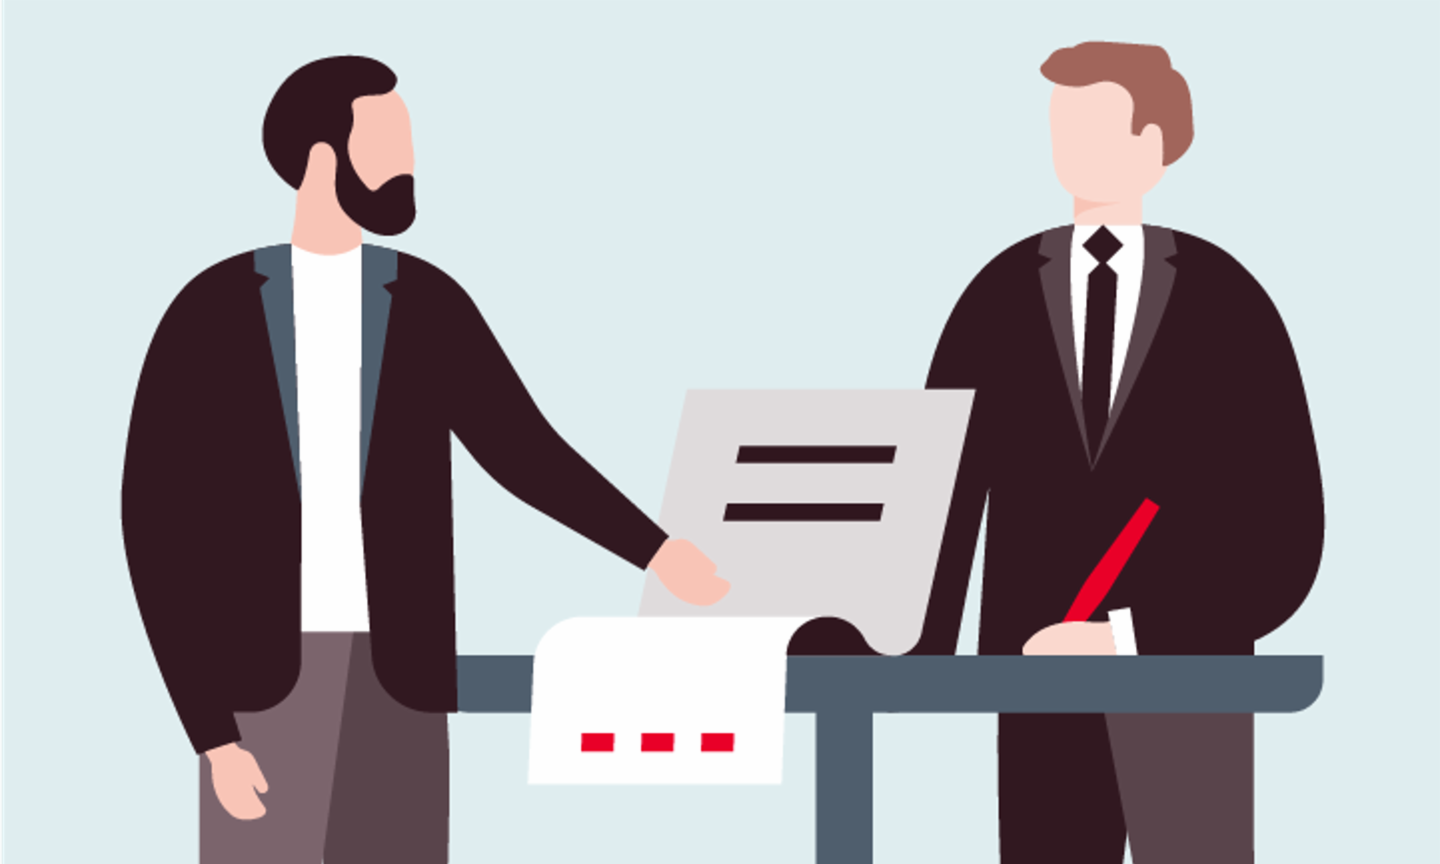 Illustation shows two men writing a signature on a contract in a business process.